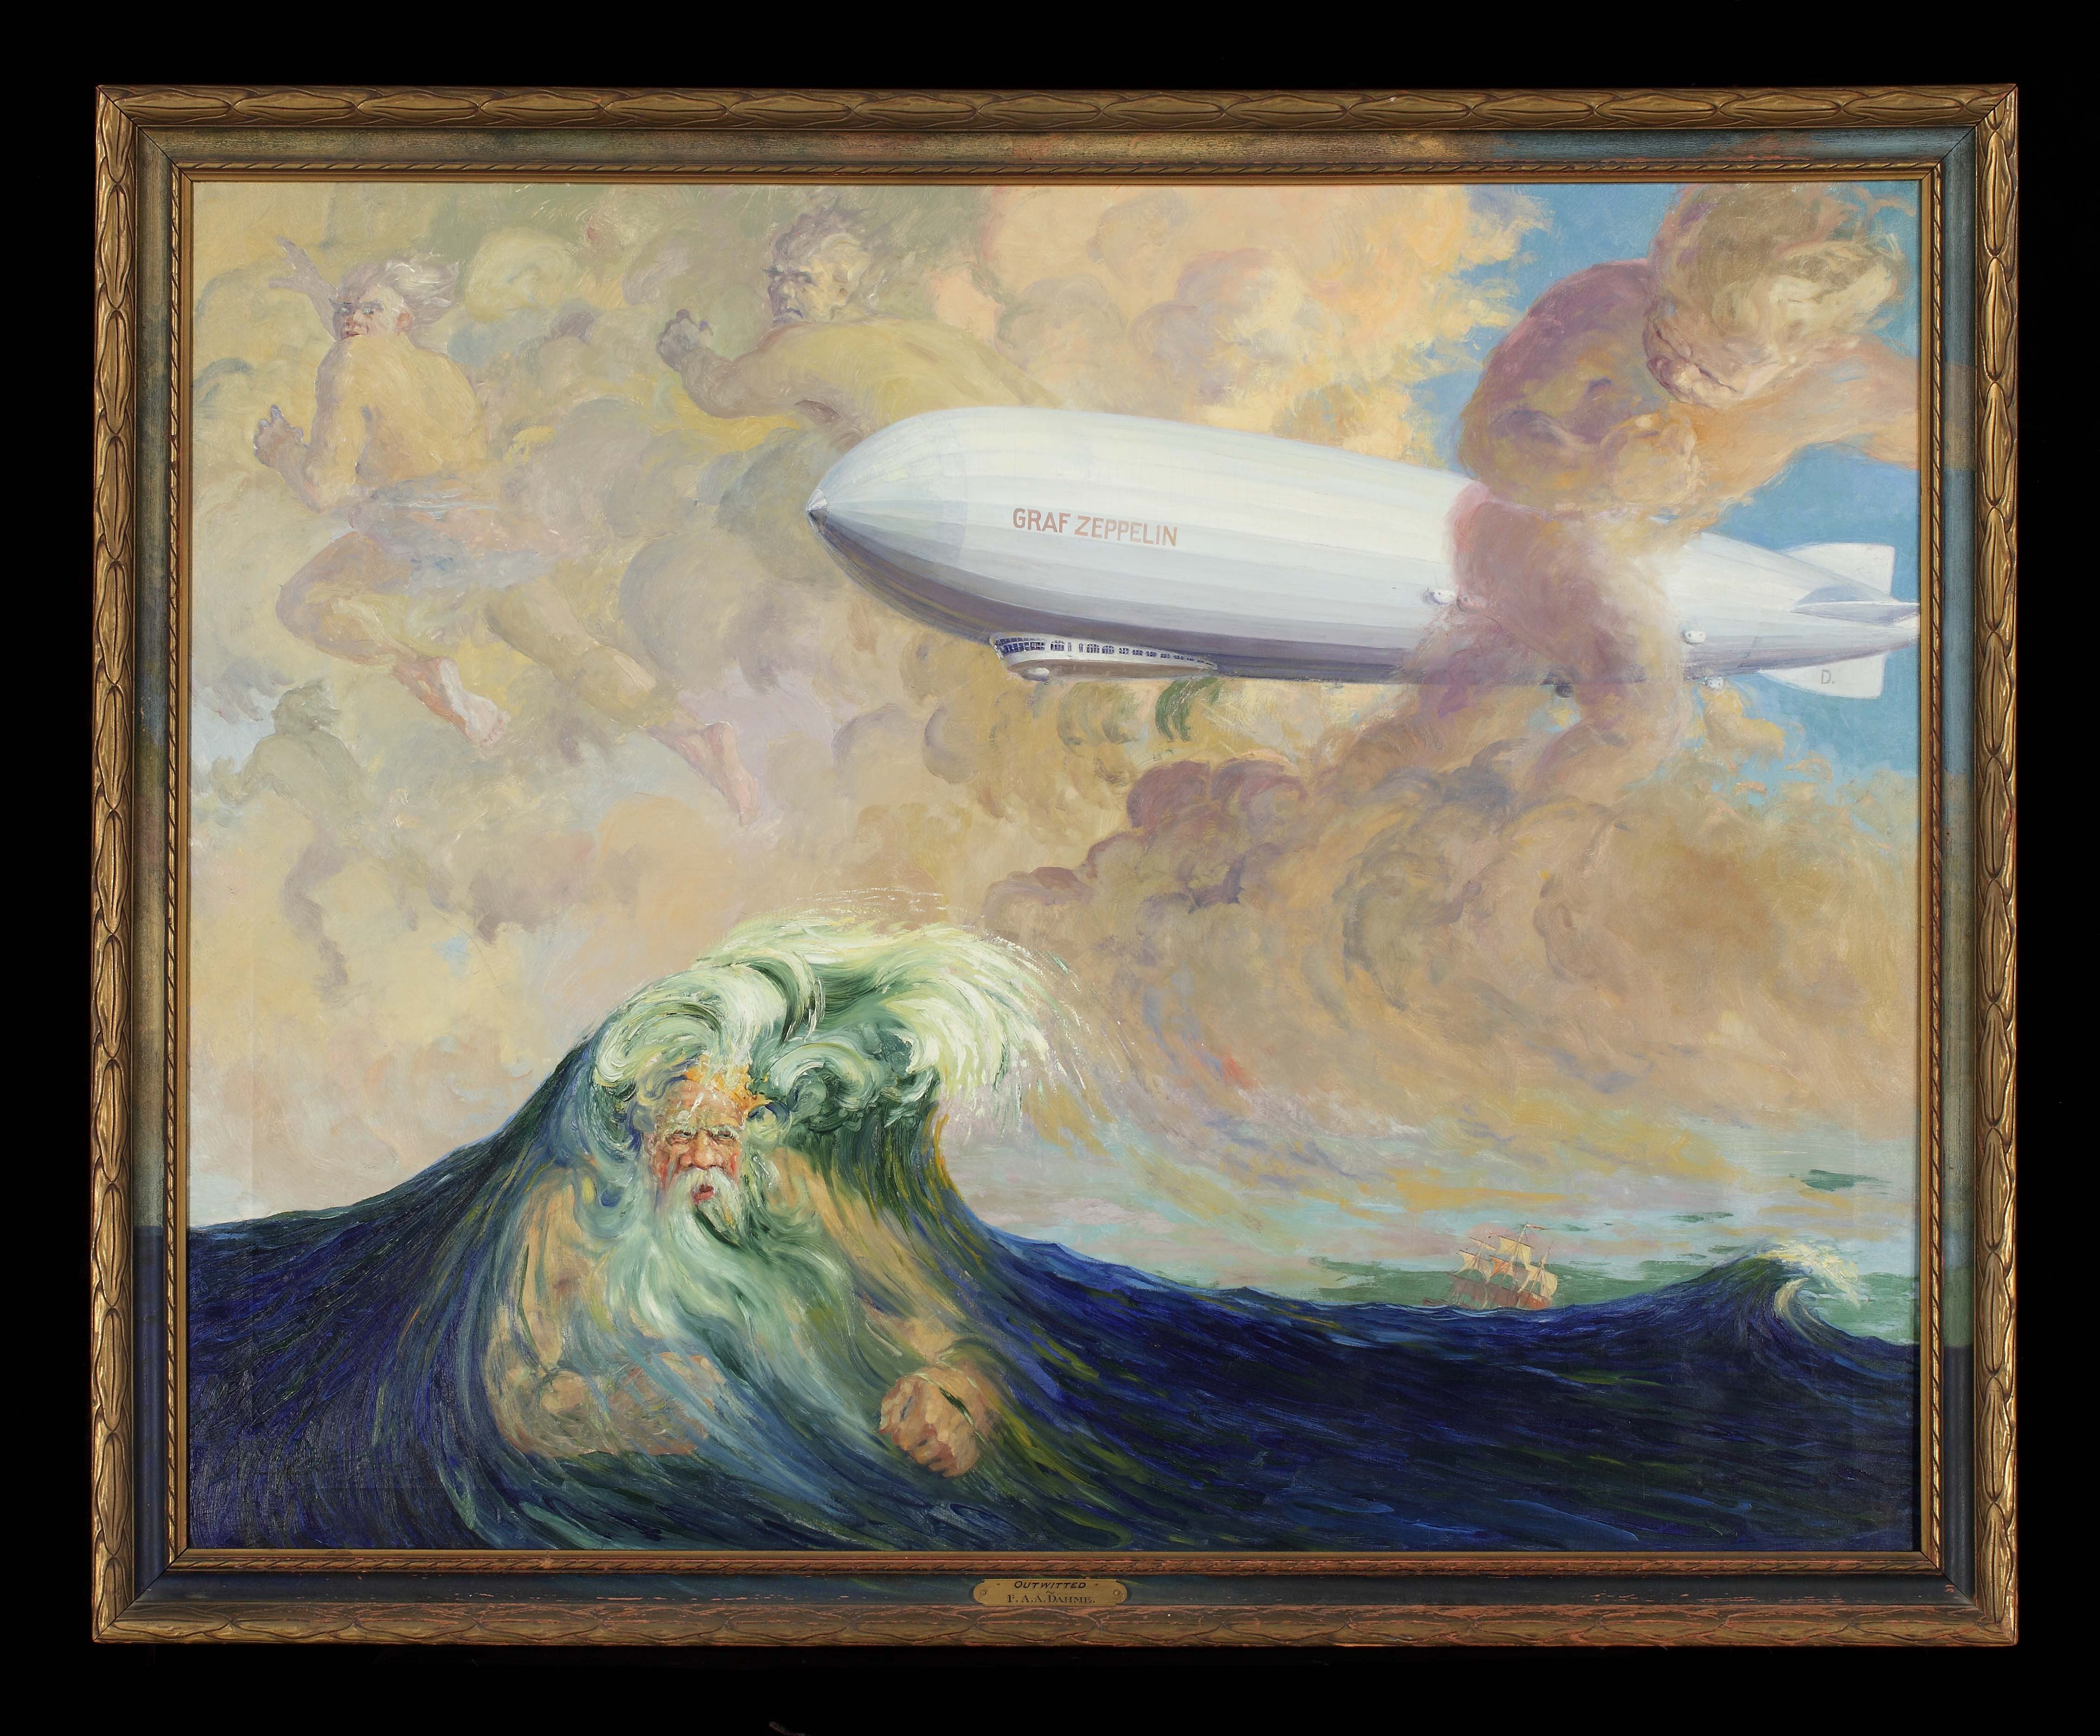 Graf Zeppelin painting by Frederich A Dahme